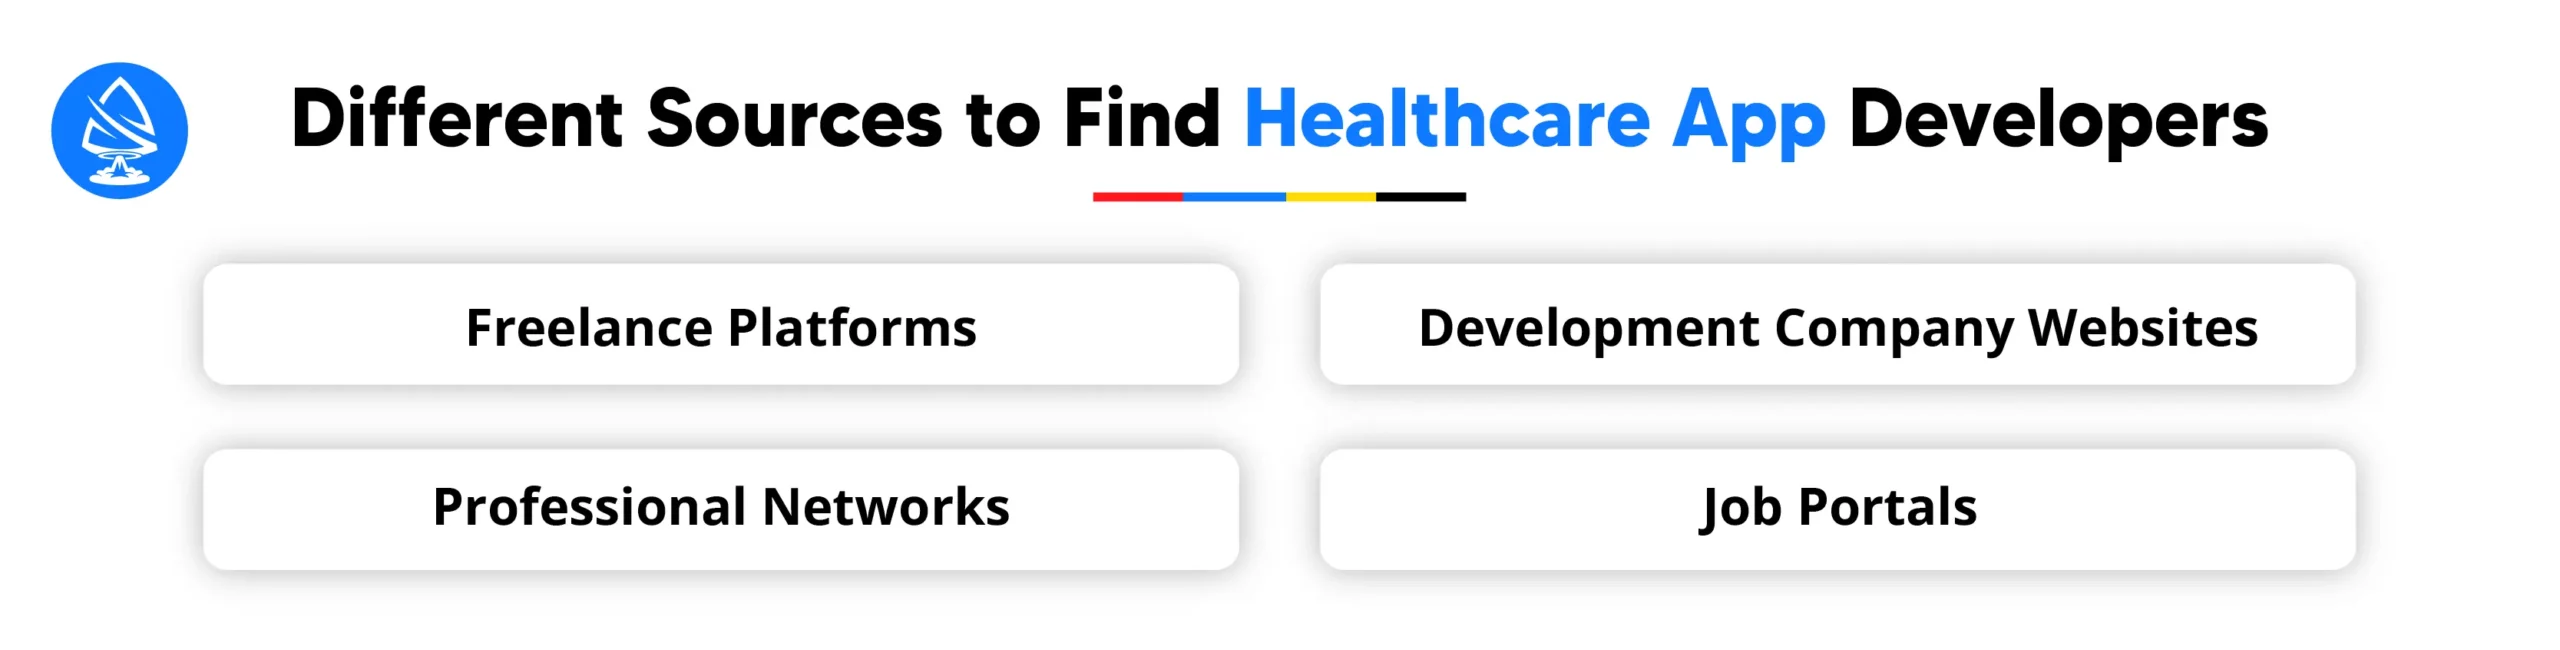 Different Sources to Find Healthcare App Developers